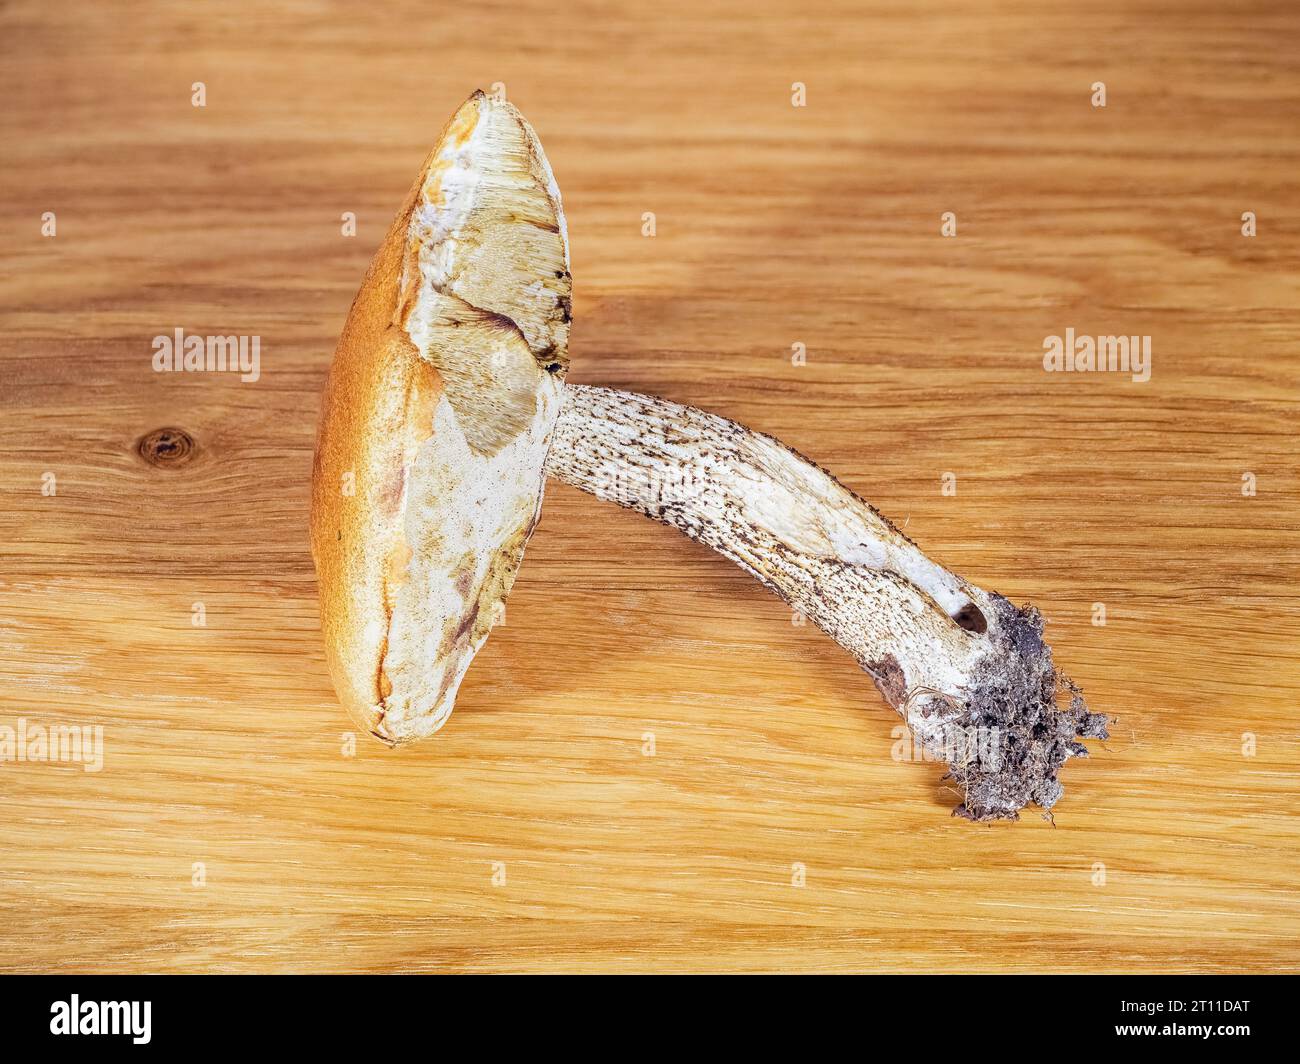 Leccinum mushroom with intact roots and gnawed cap on a wooden board Stock Photo